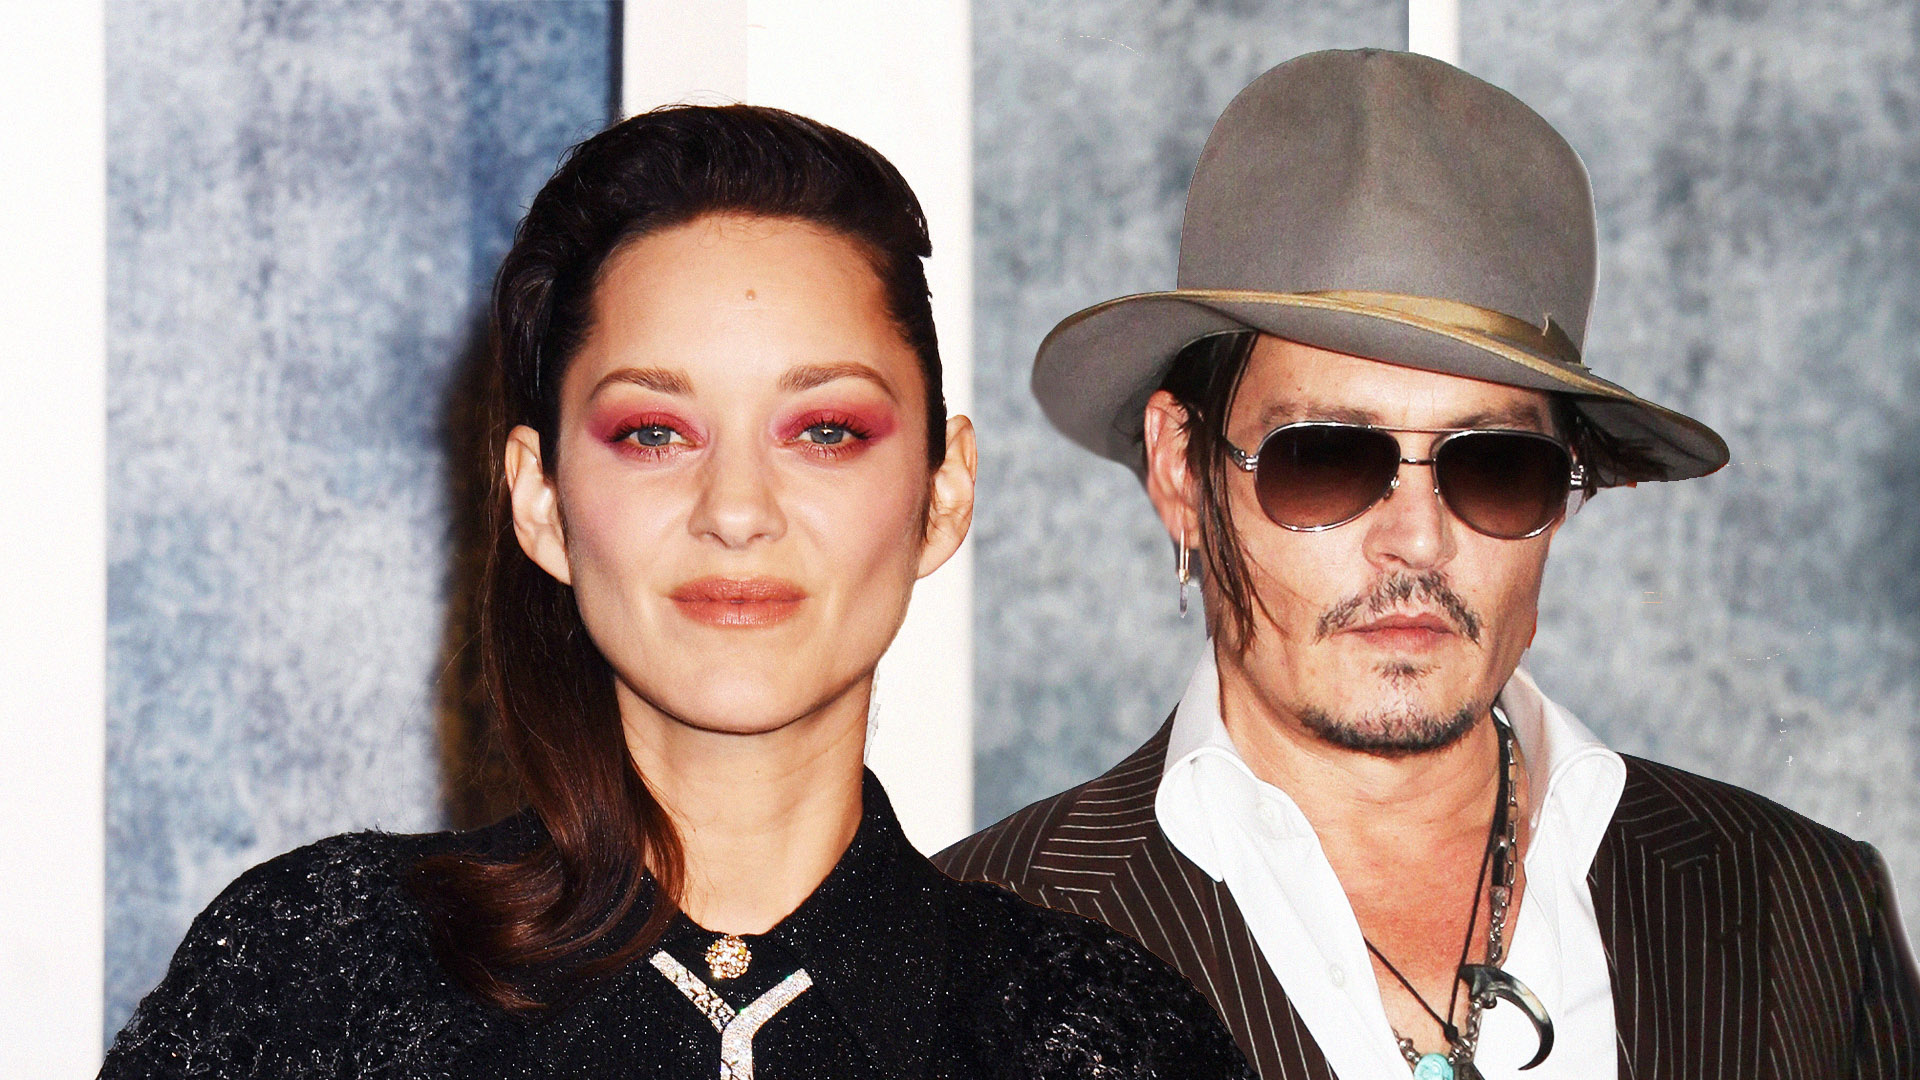 Here's How Good of a Kisser Johnny Depp Actually Is, According to Marion Cotillard